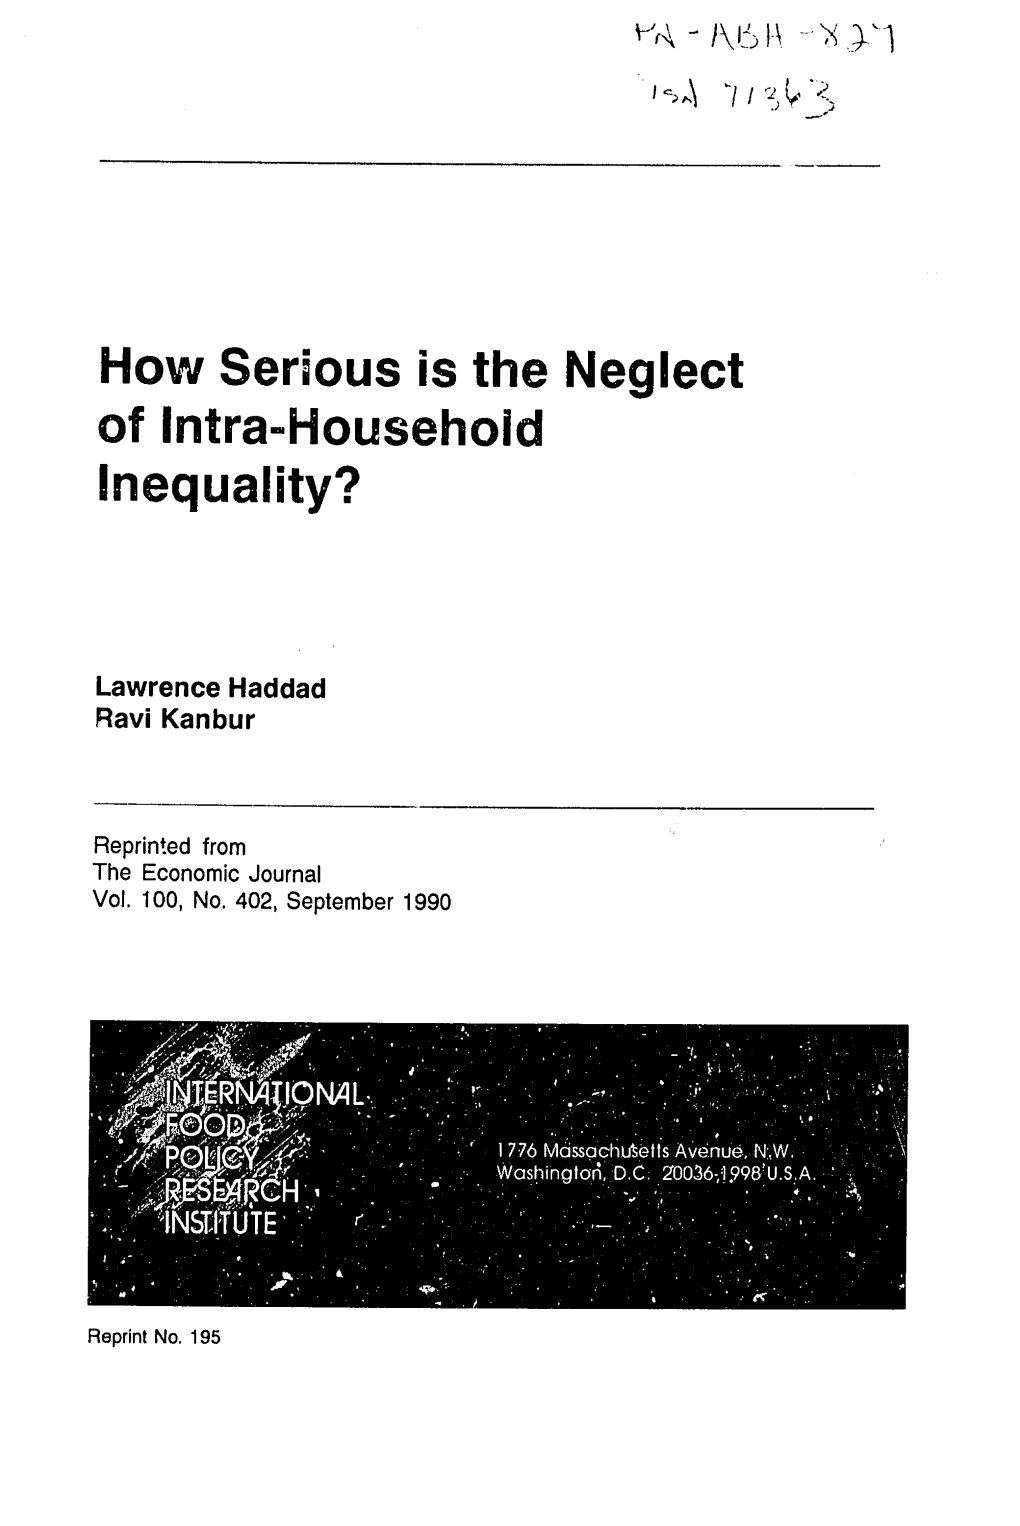 How Serious Is the Neglect of Intra-Household Inequality?